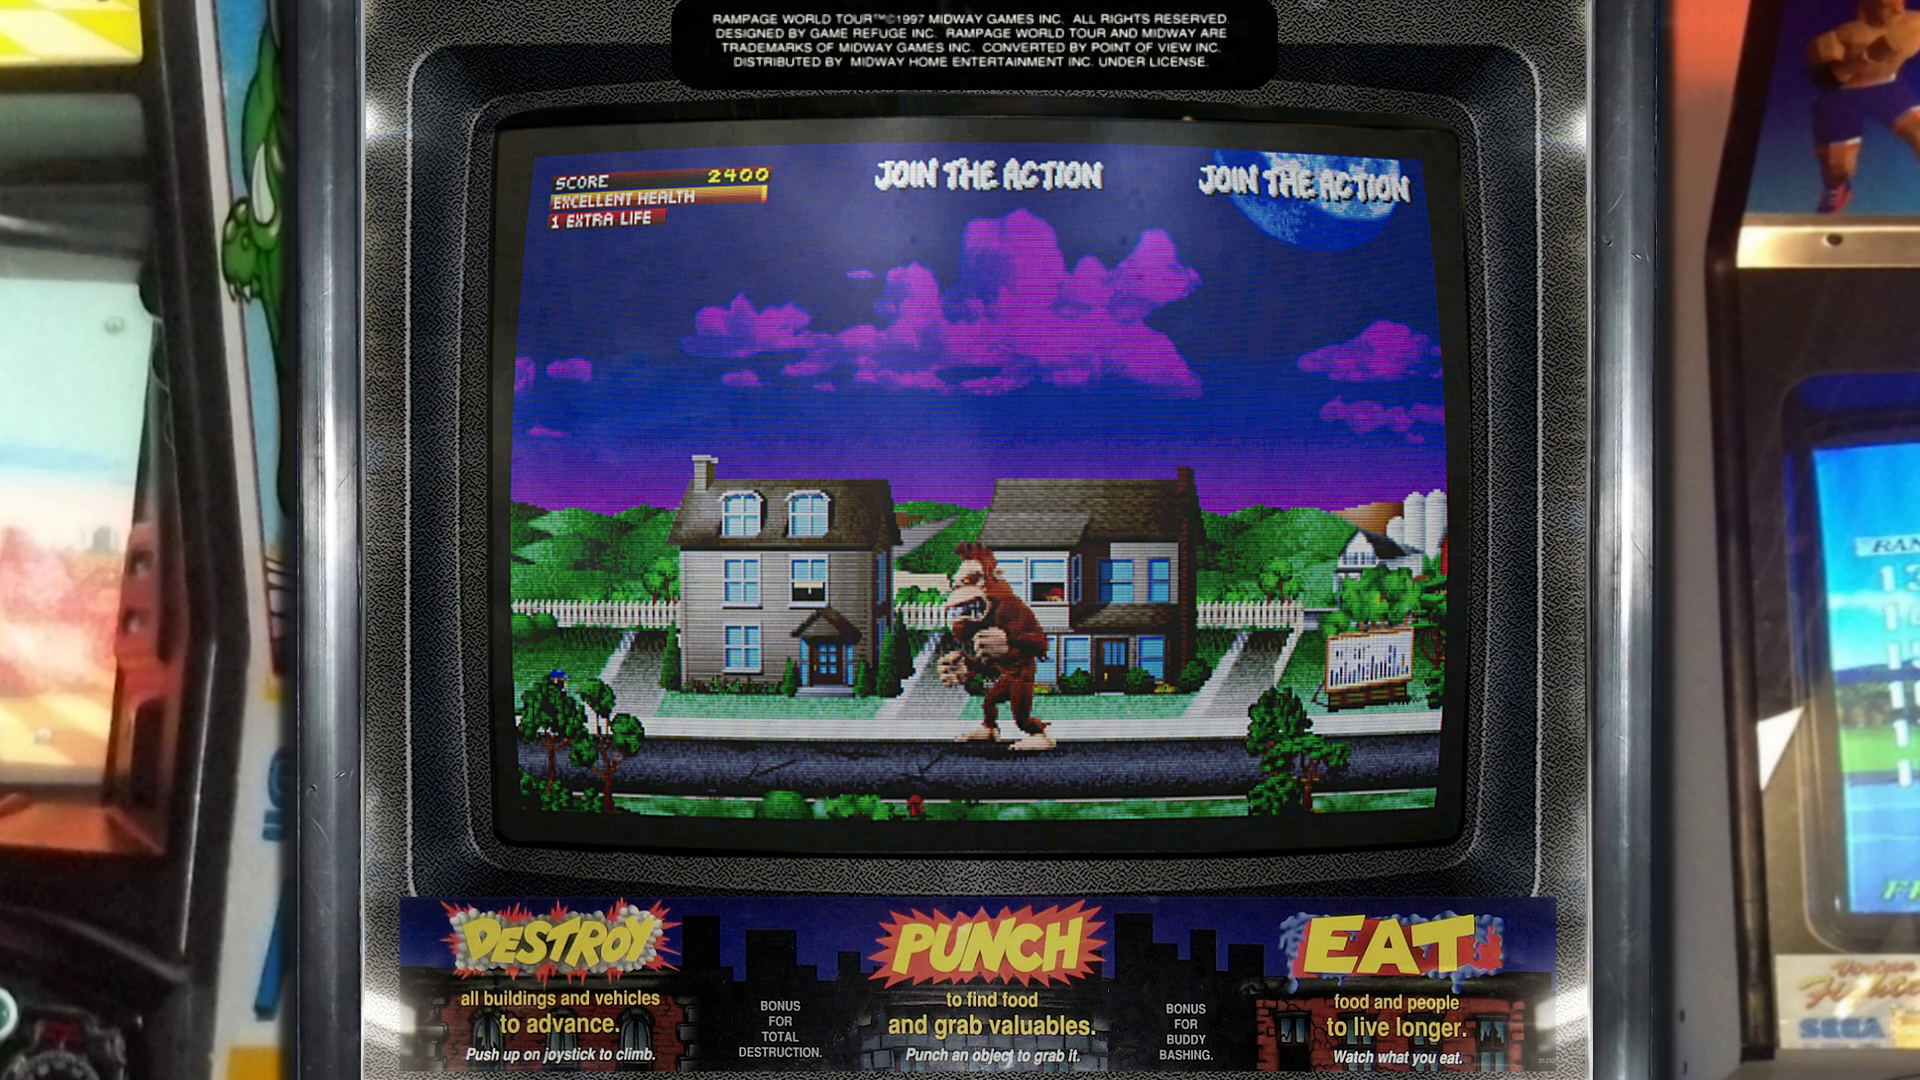 Check out my latest realistic Arcade bezel pack for Mame Arcade and